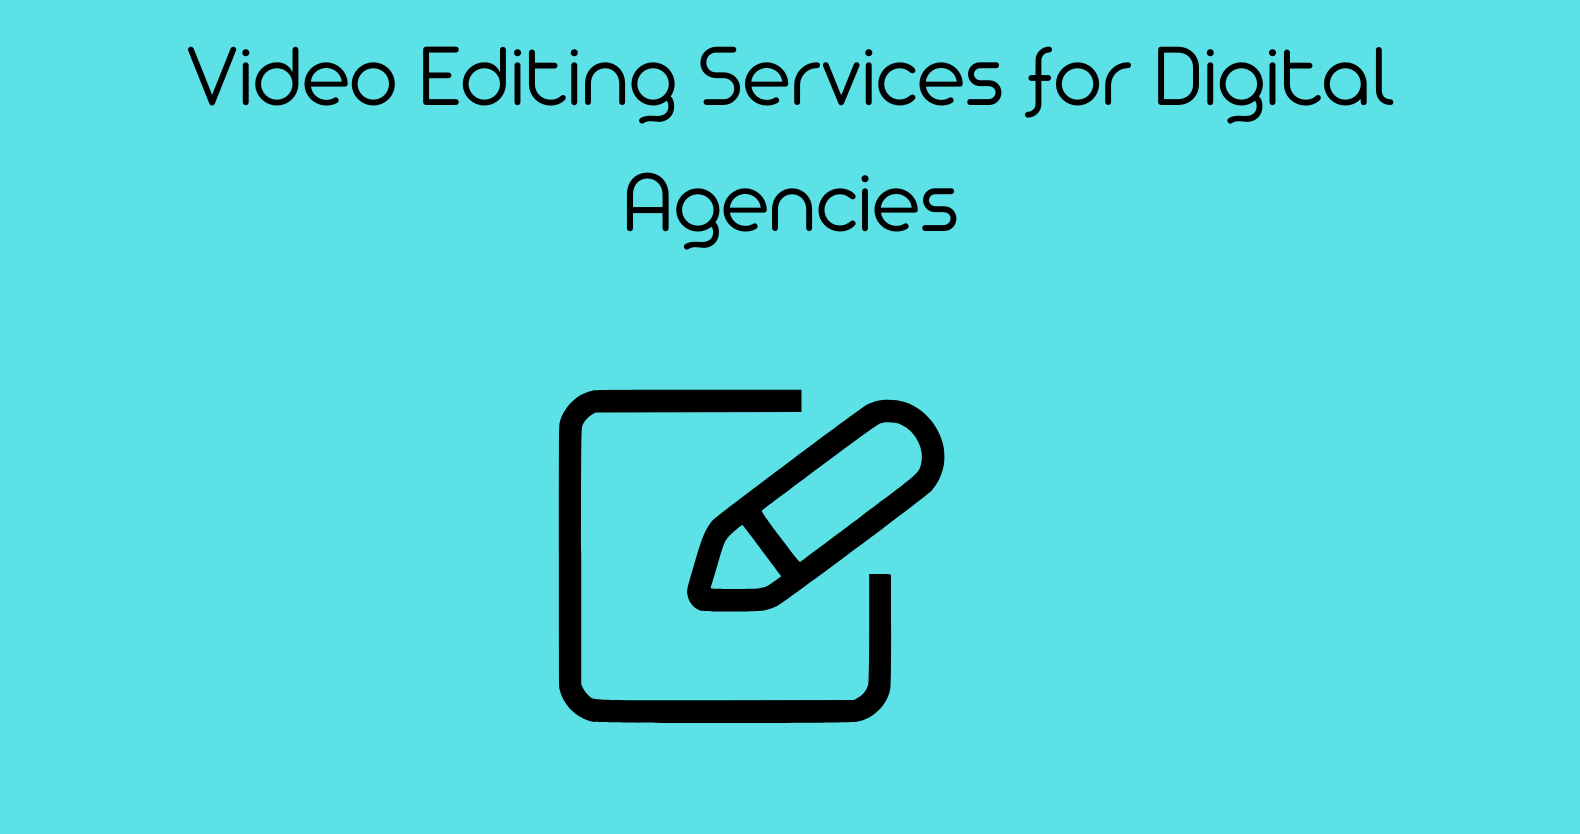 Video Editing Services for Digital Agencies